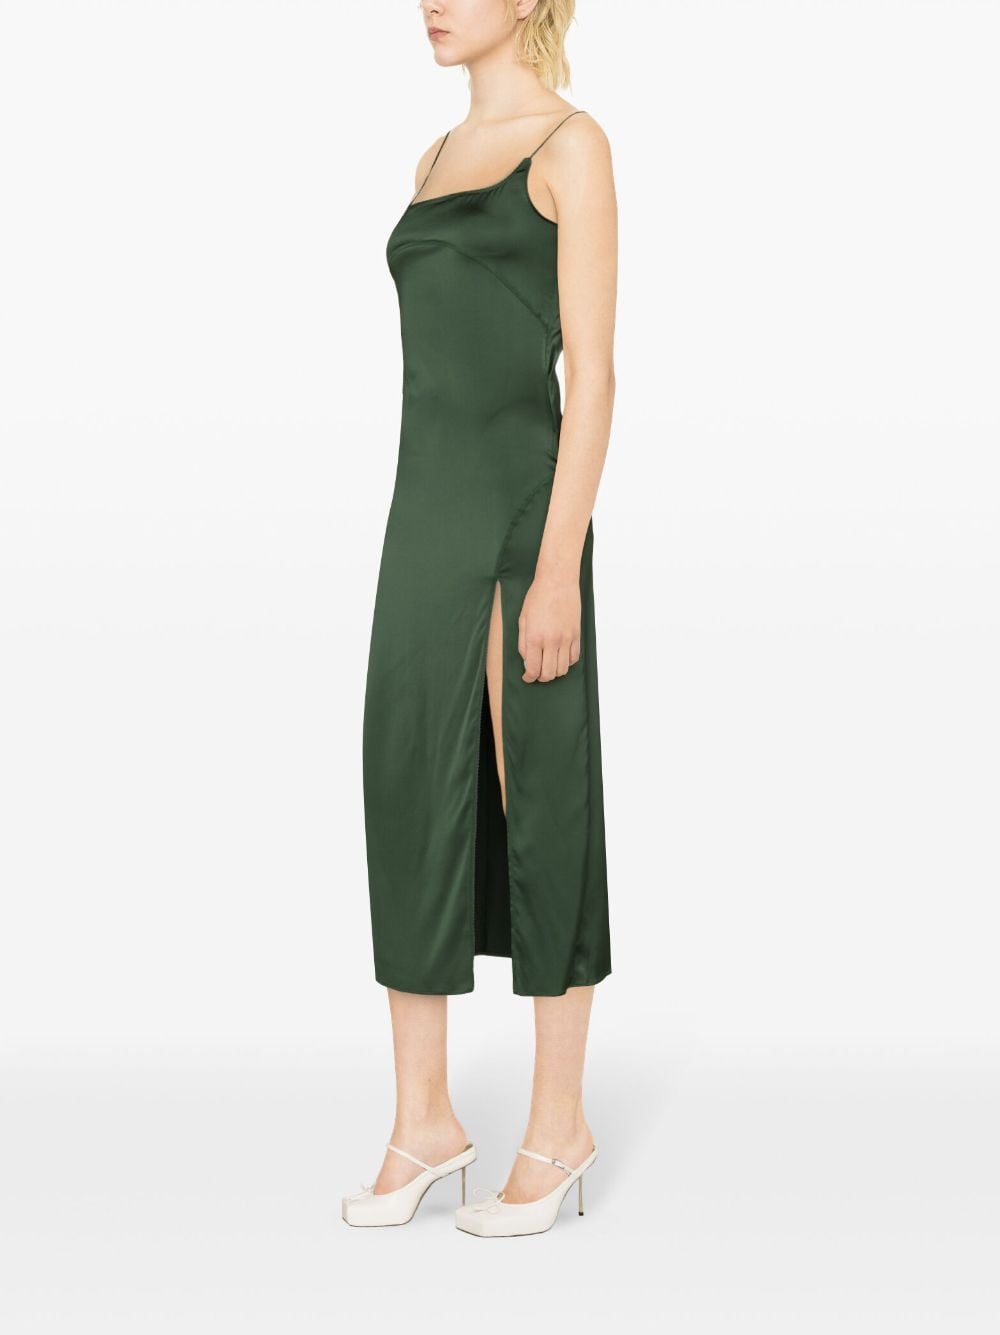 JACQUEMUS Green Notte Dress for Women - SS24 Collection